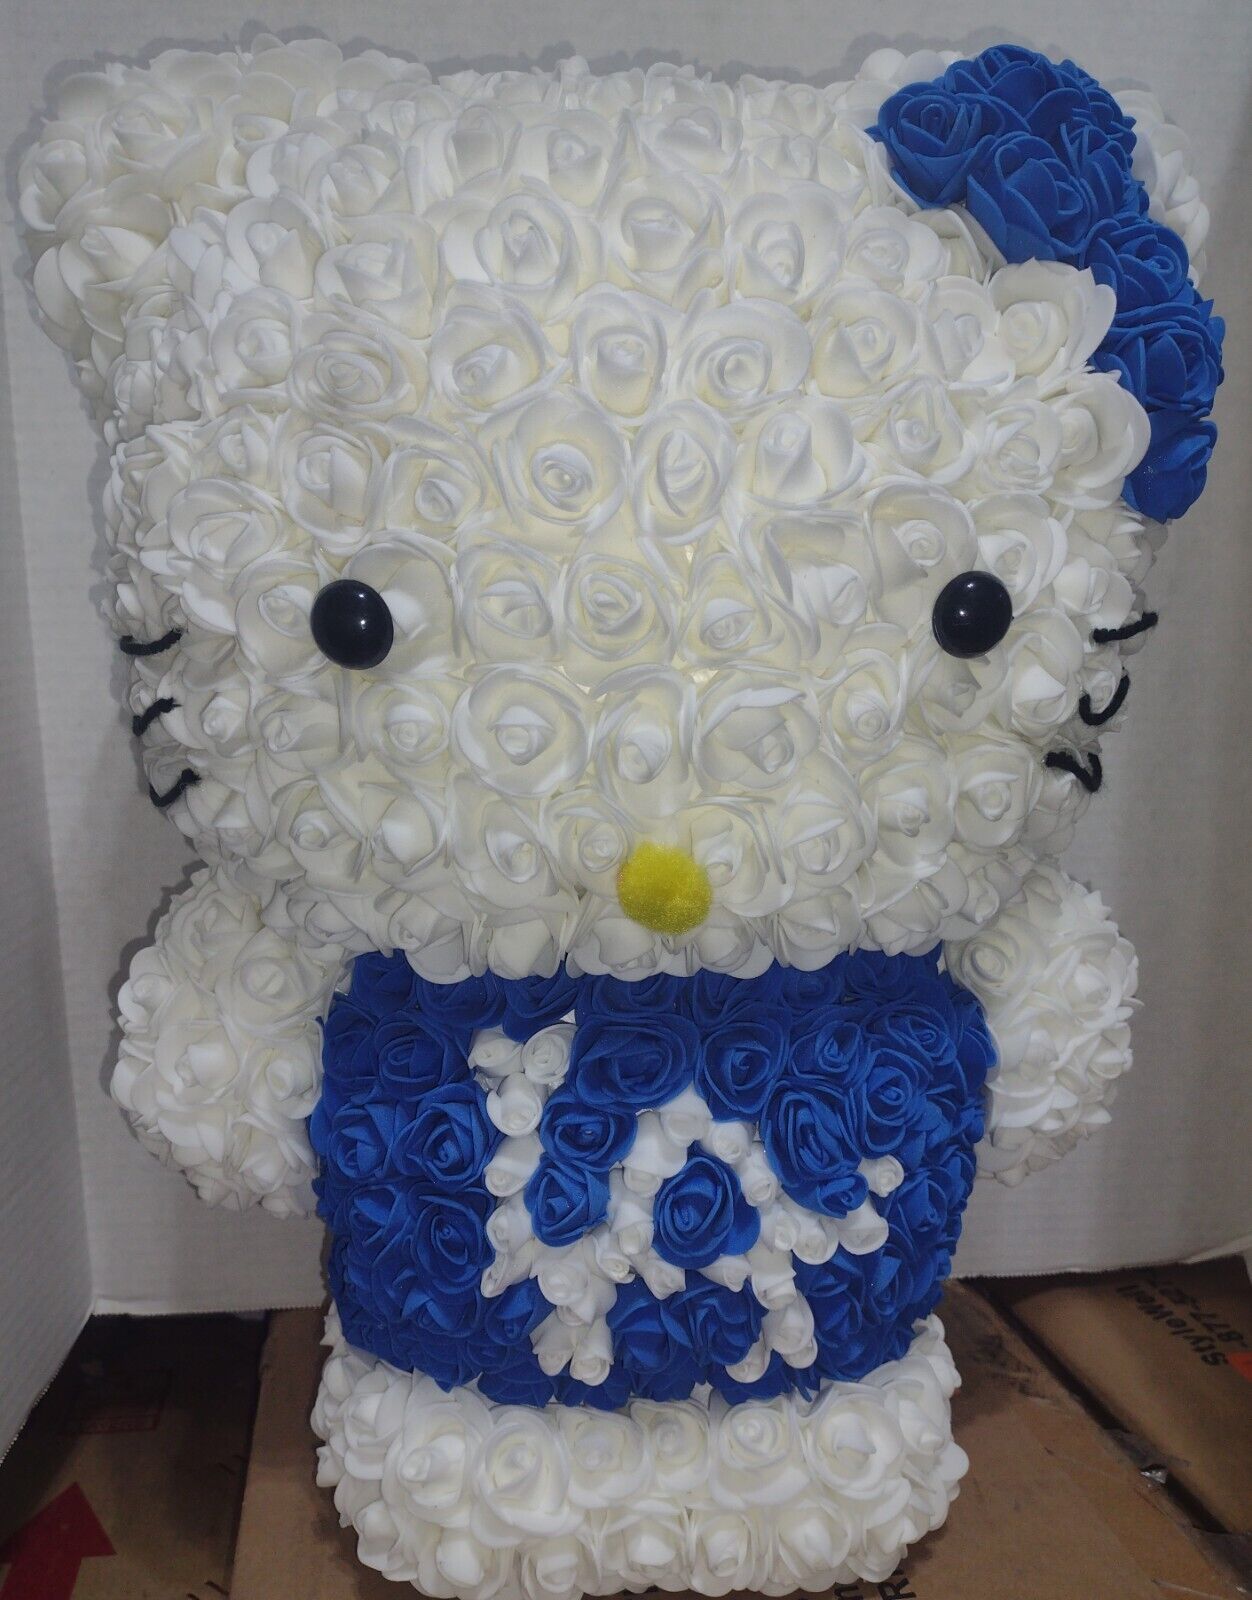 Costum 16 inch Tall L.A Dodgers Hello Kitty Made out of Foam Rose Flowers